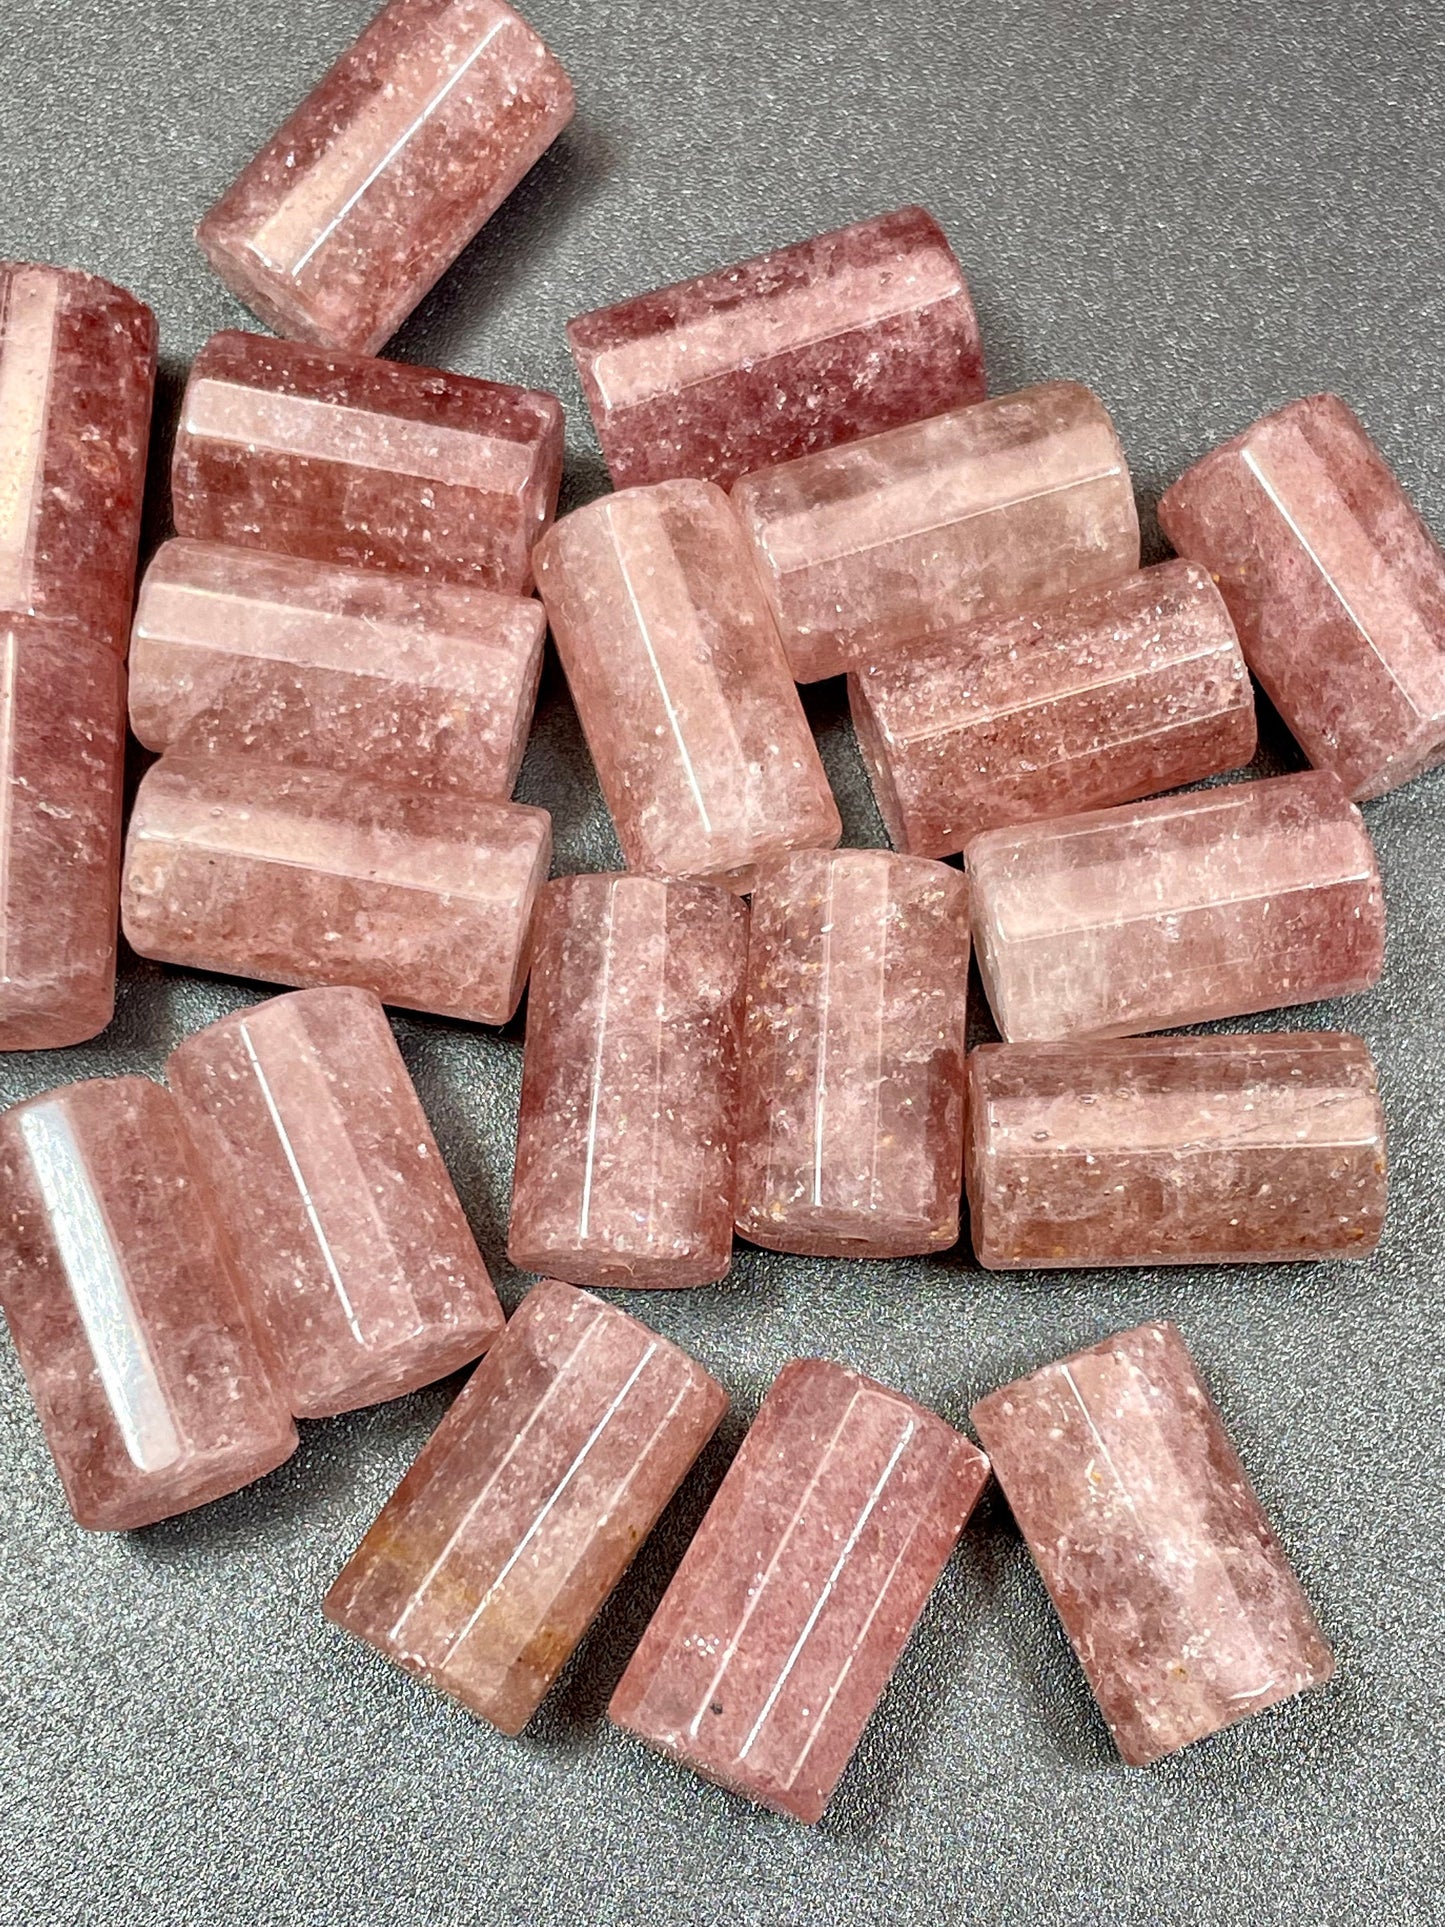 Natural Strawberry Quartz Gemstone Bead Faceted 17x9mm Tube Shape, Beautiful Red-Pink Color Strawberry Quartz LOOSE Beads